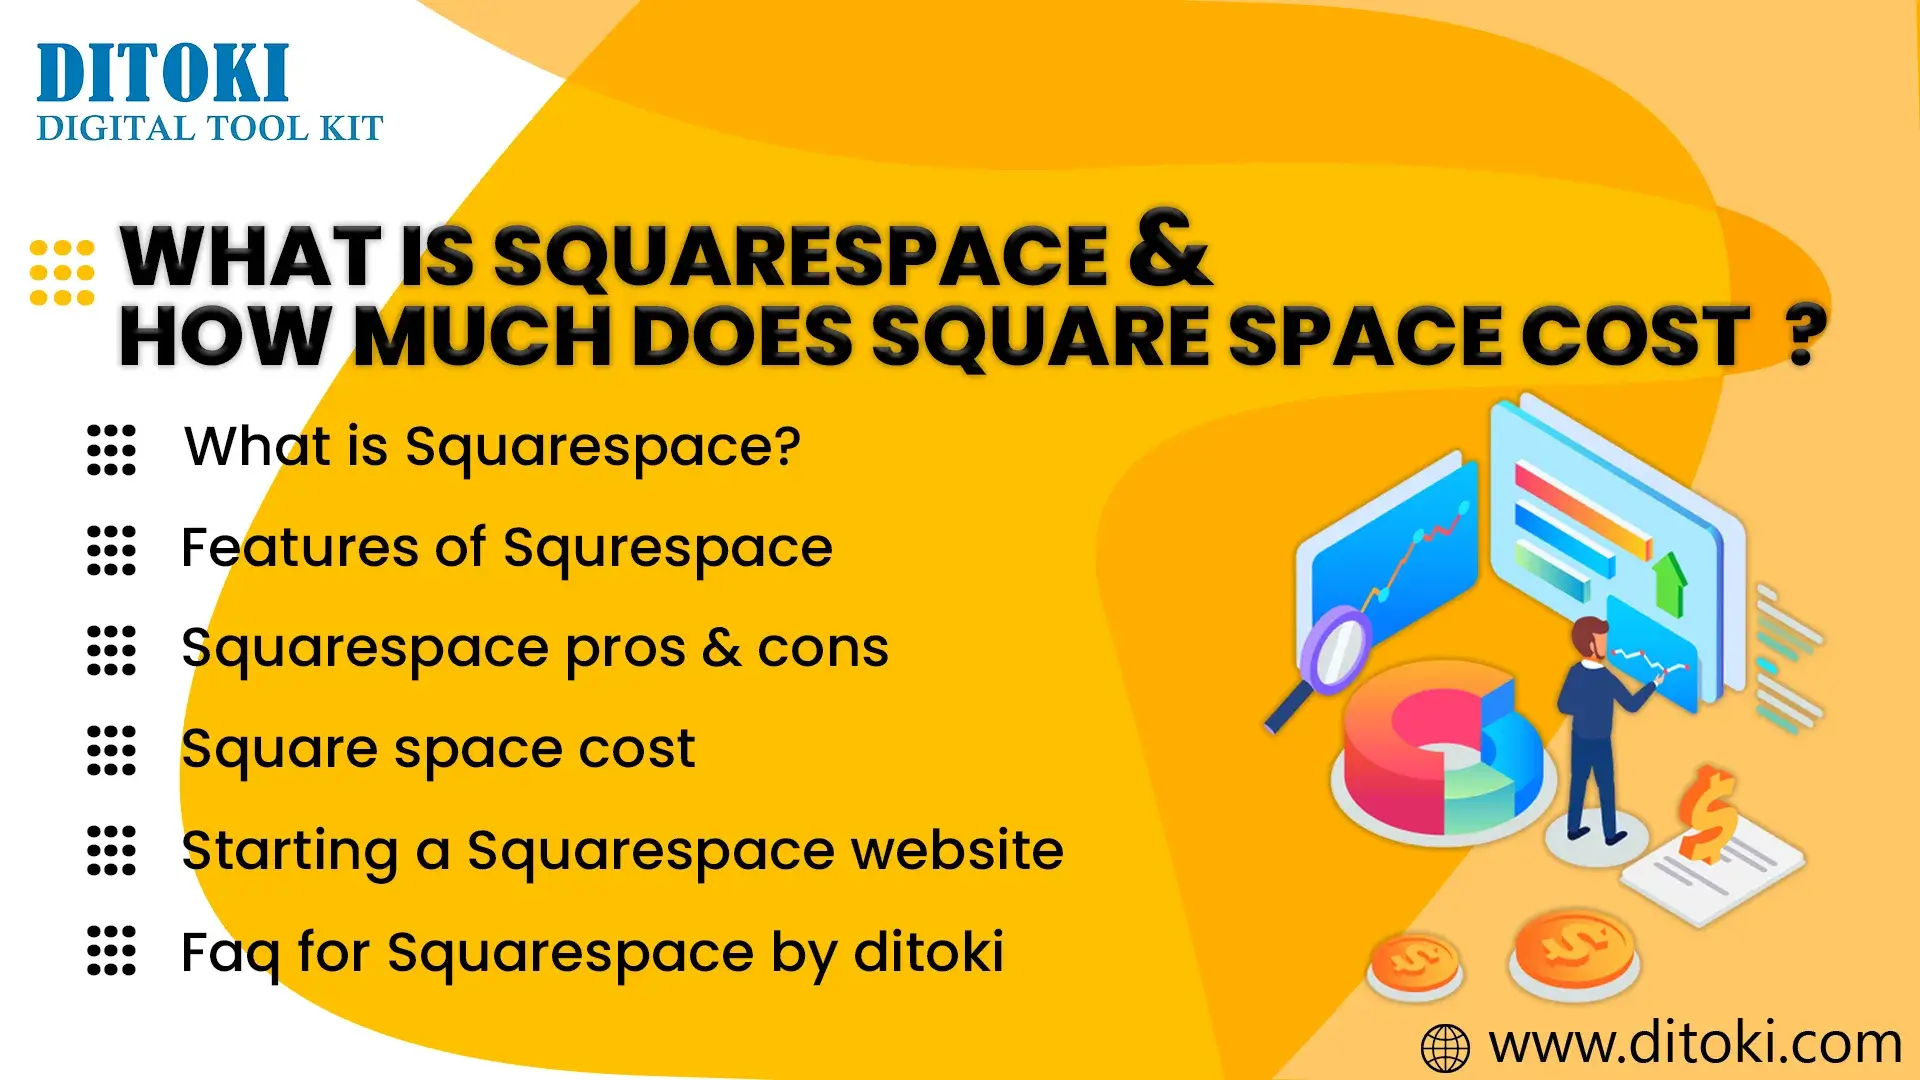 WHAT IS SQUARESPACE